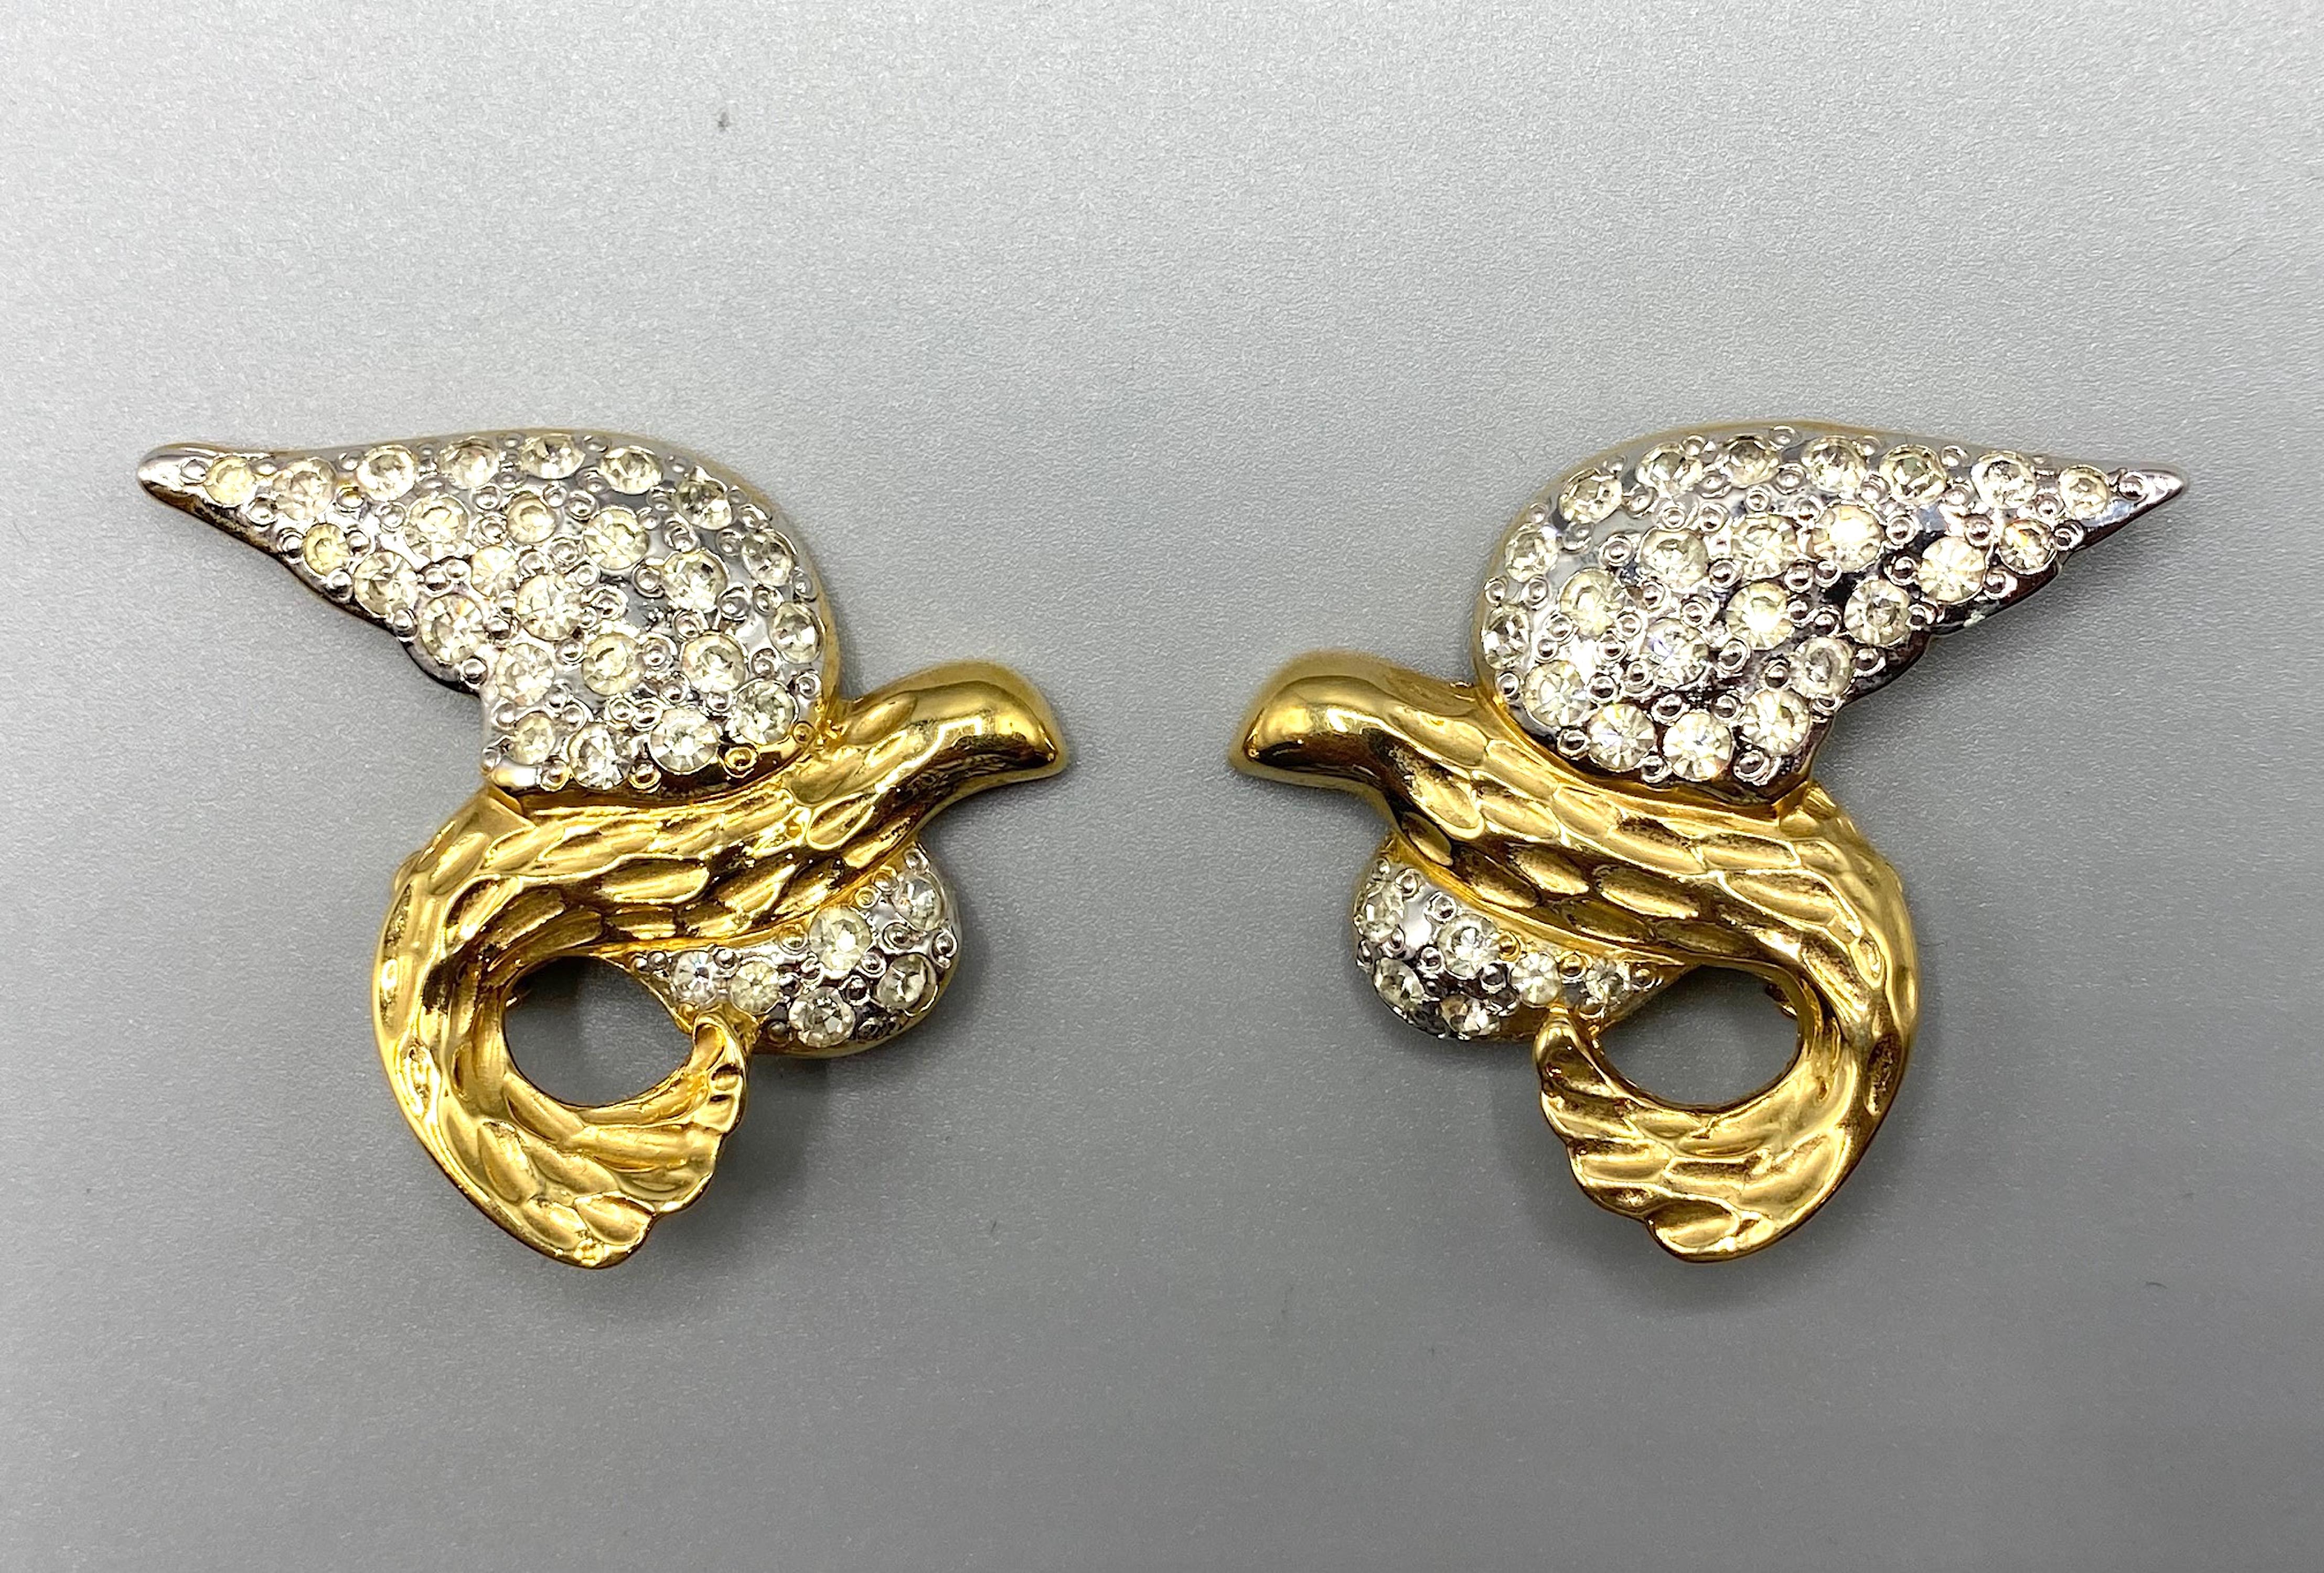 A unique 1980s pair of Yves Saint Laurent abstract bird in flight earrings designed by Robert Goosens. The wings are rhodium plated and set with rhinestones. The body is in gold plate. Goosens designed couture  jewelry for Chanel, YSL, Balenciaga,